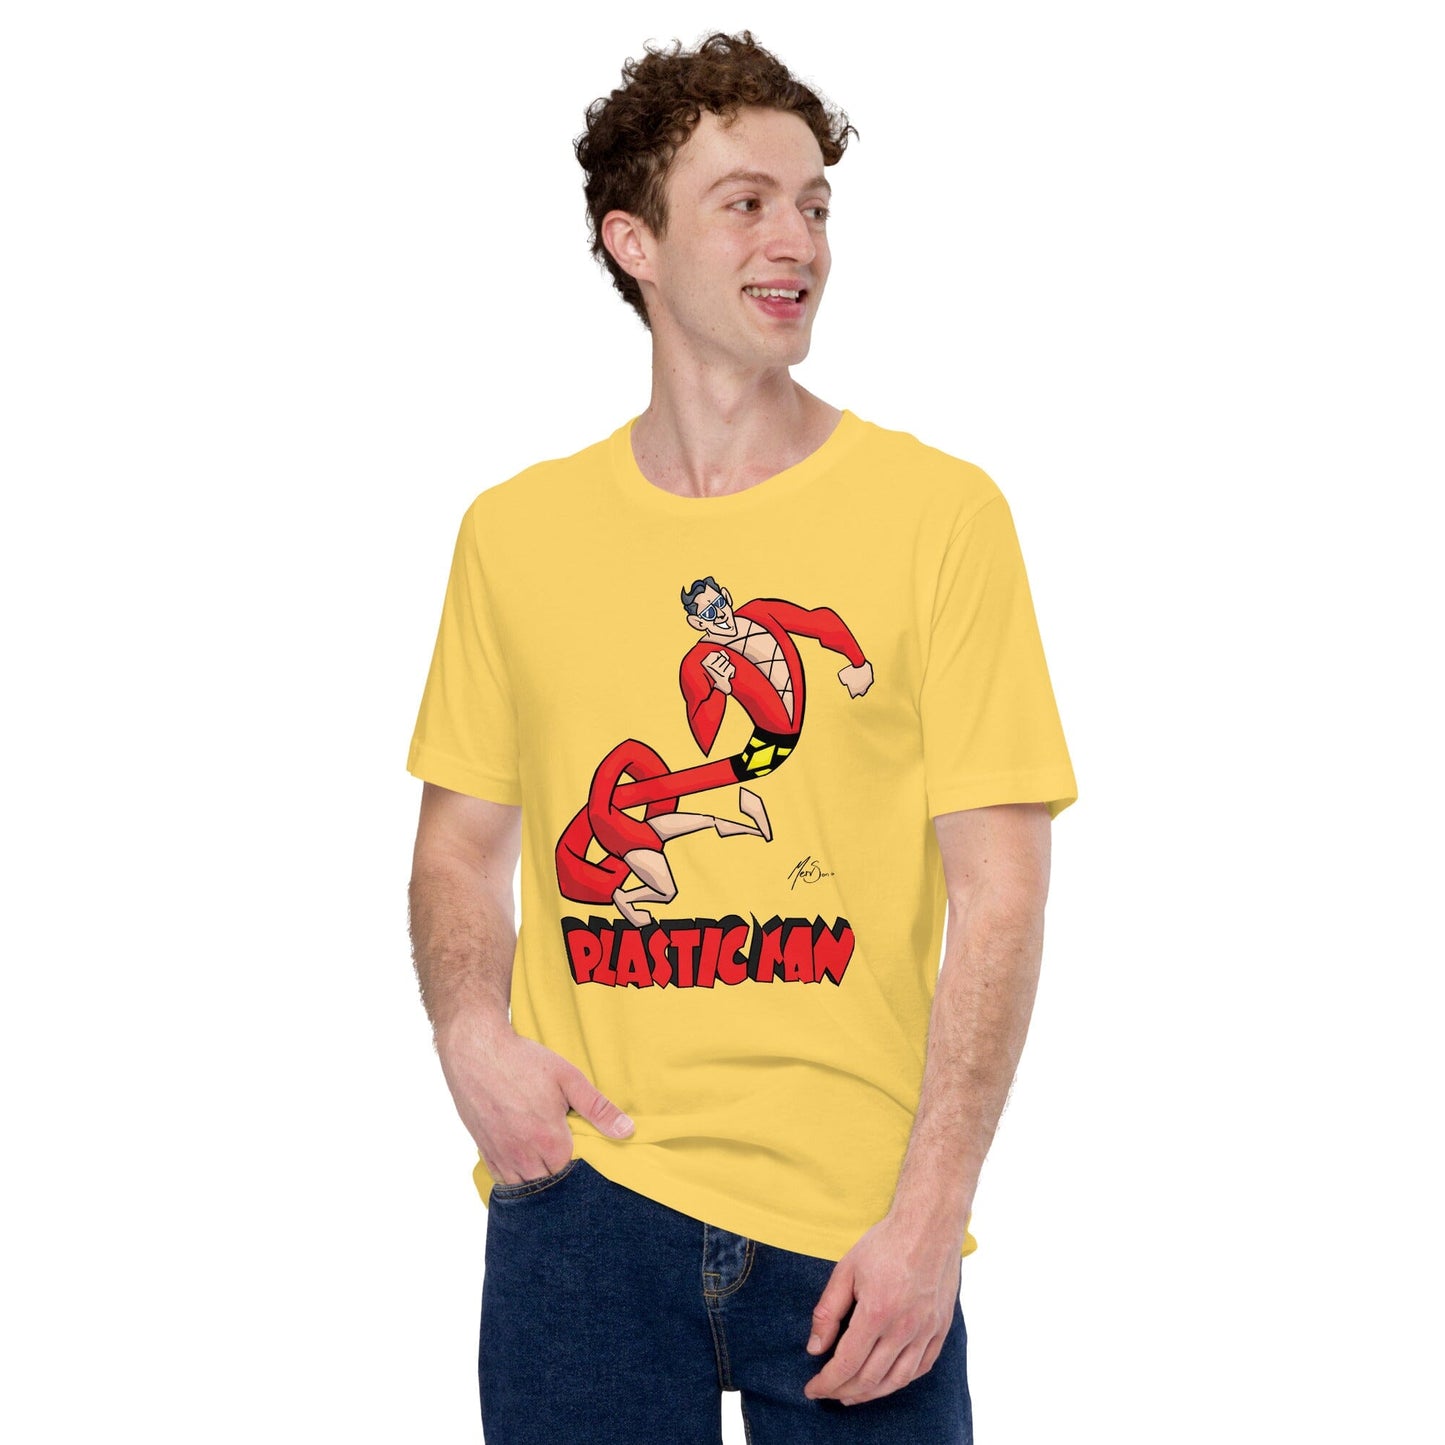 Plastic Man T-Shirt: Stretch Your Style in Comfort! Mervson Yellow S 